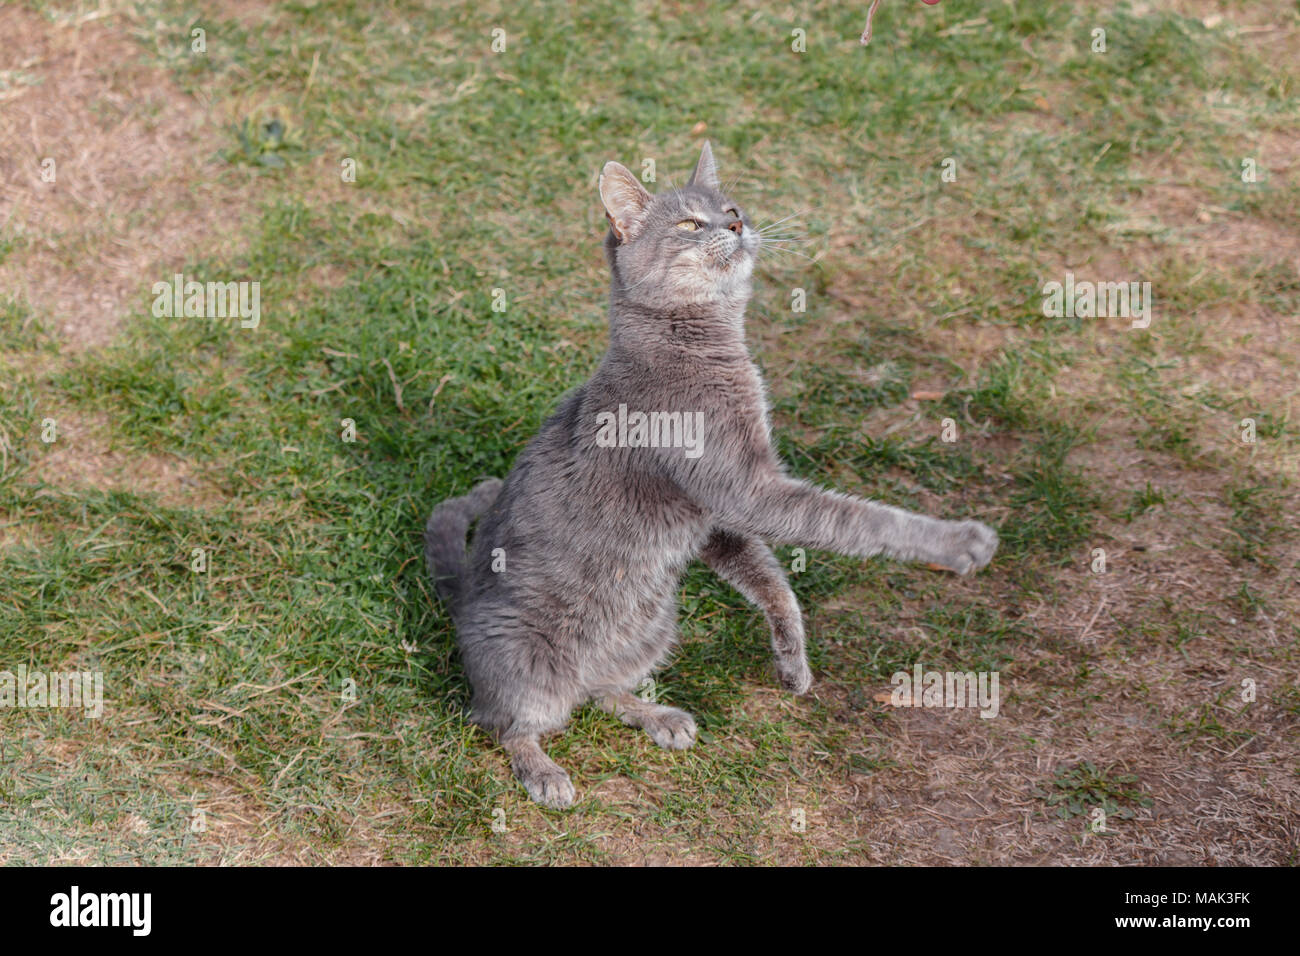 The boss threw food on his cat and the cat jumped to catch it. Stock Photo